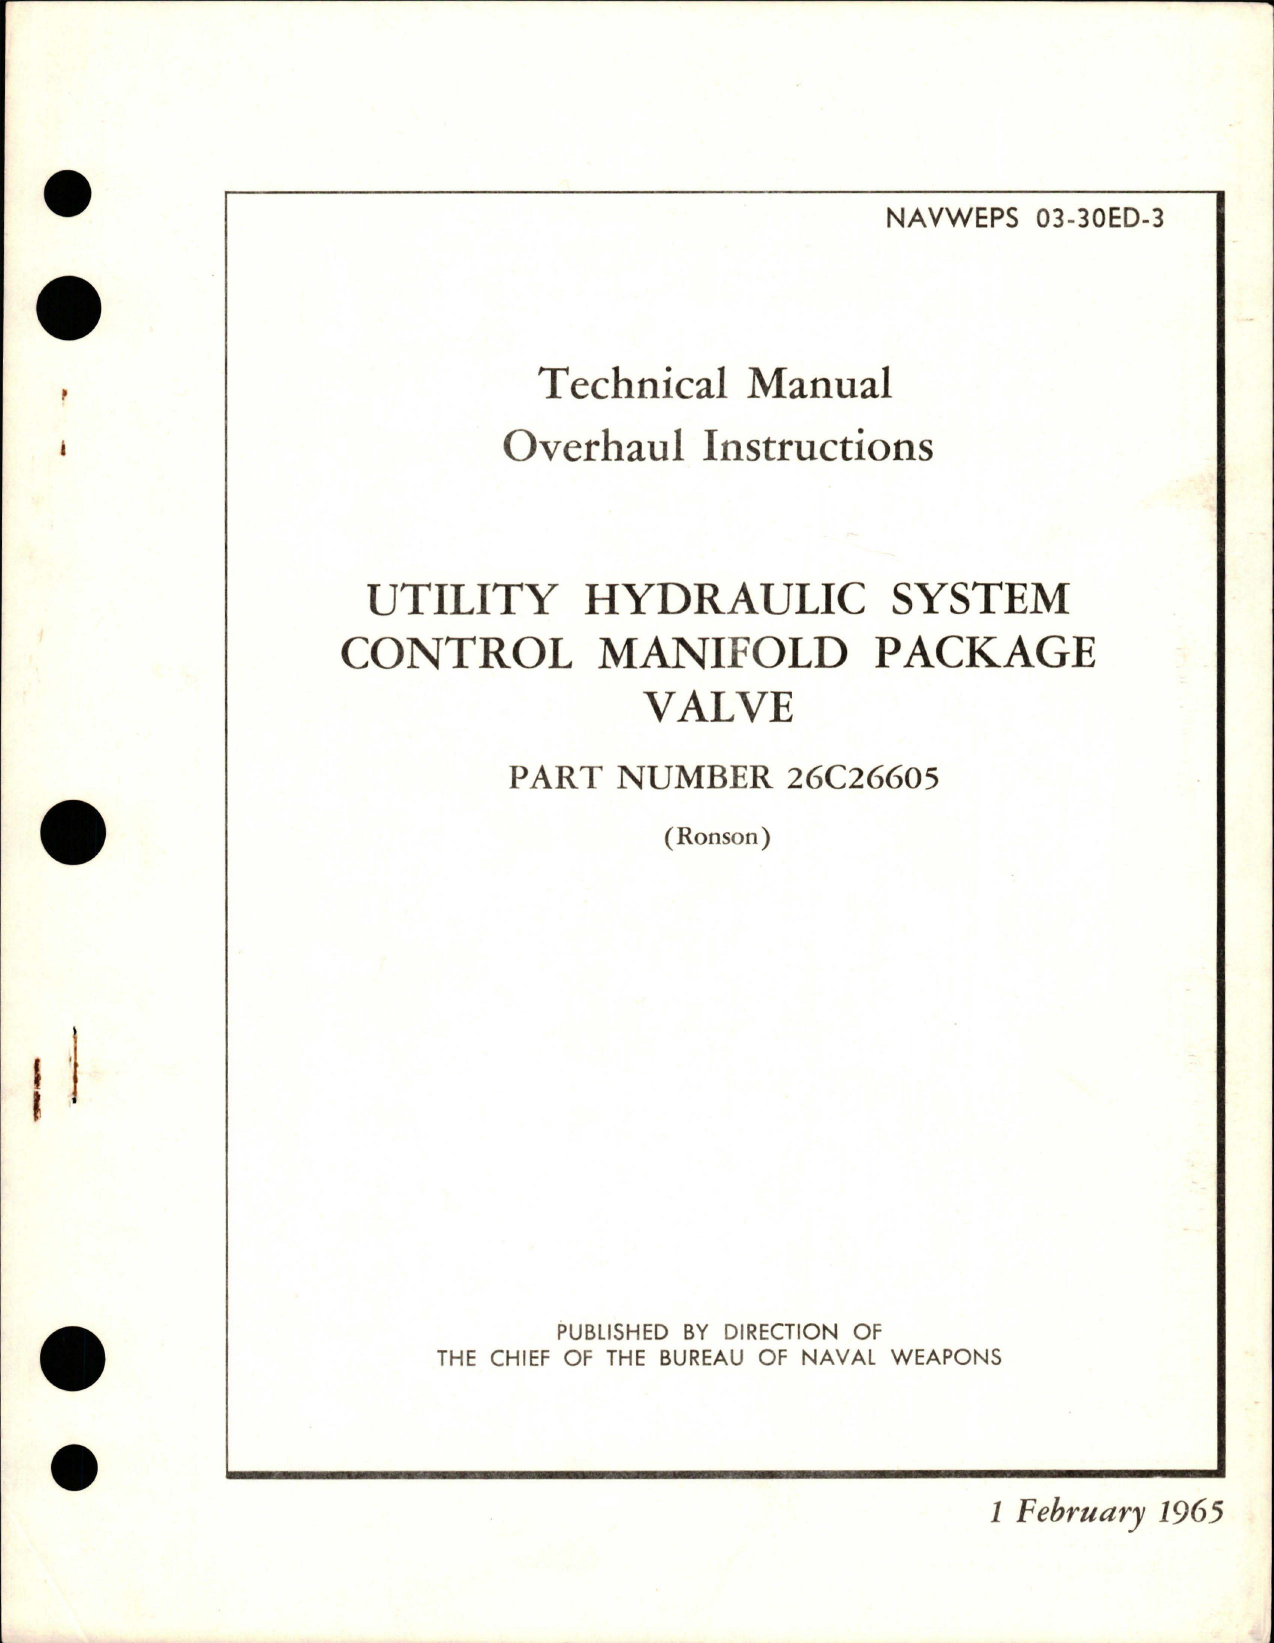 Sample page 1 from AirCorps Library document: Overhaul Instructions for Utility Hydraulic System Control Manifold Package Valve - Part 26C26605